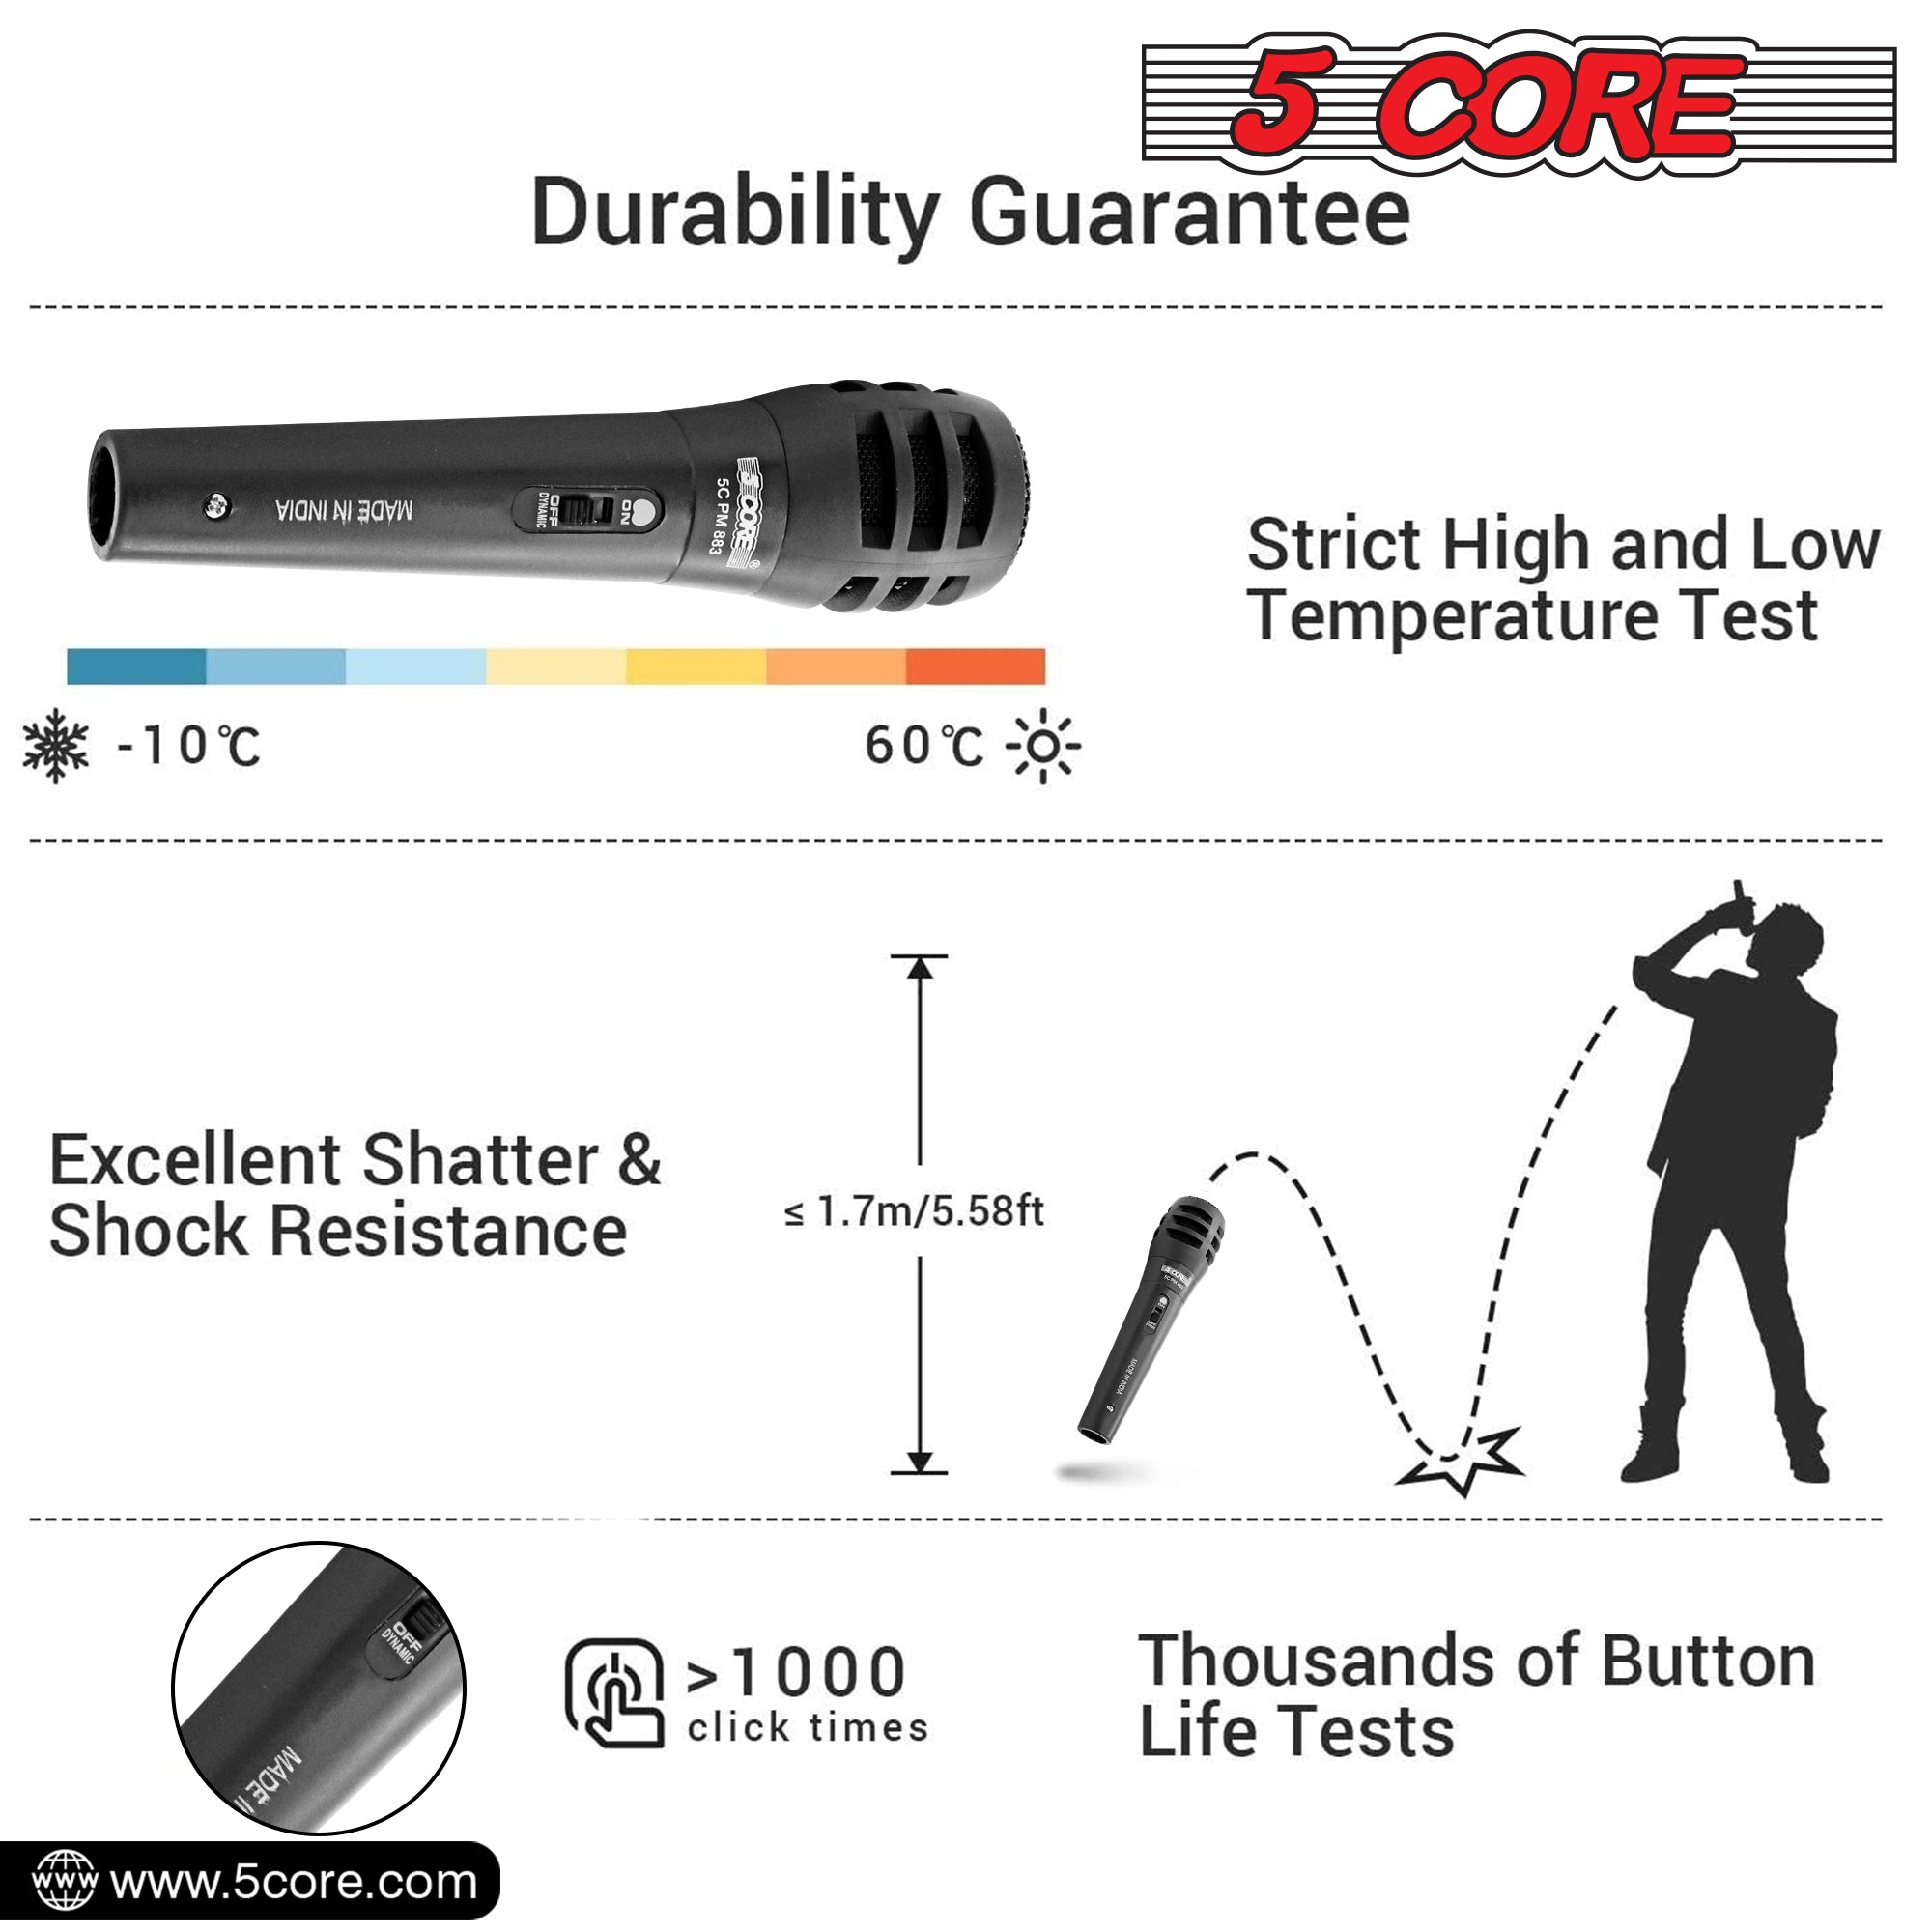 Superior Sound Quality with 5 Core PM-883 Cardioid Dynamic Microphone